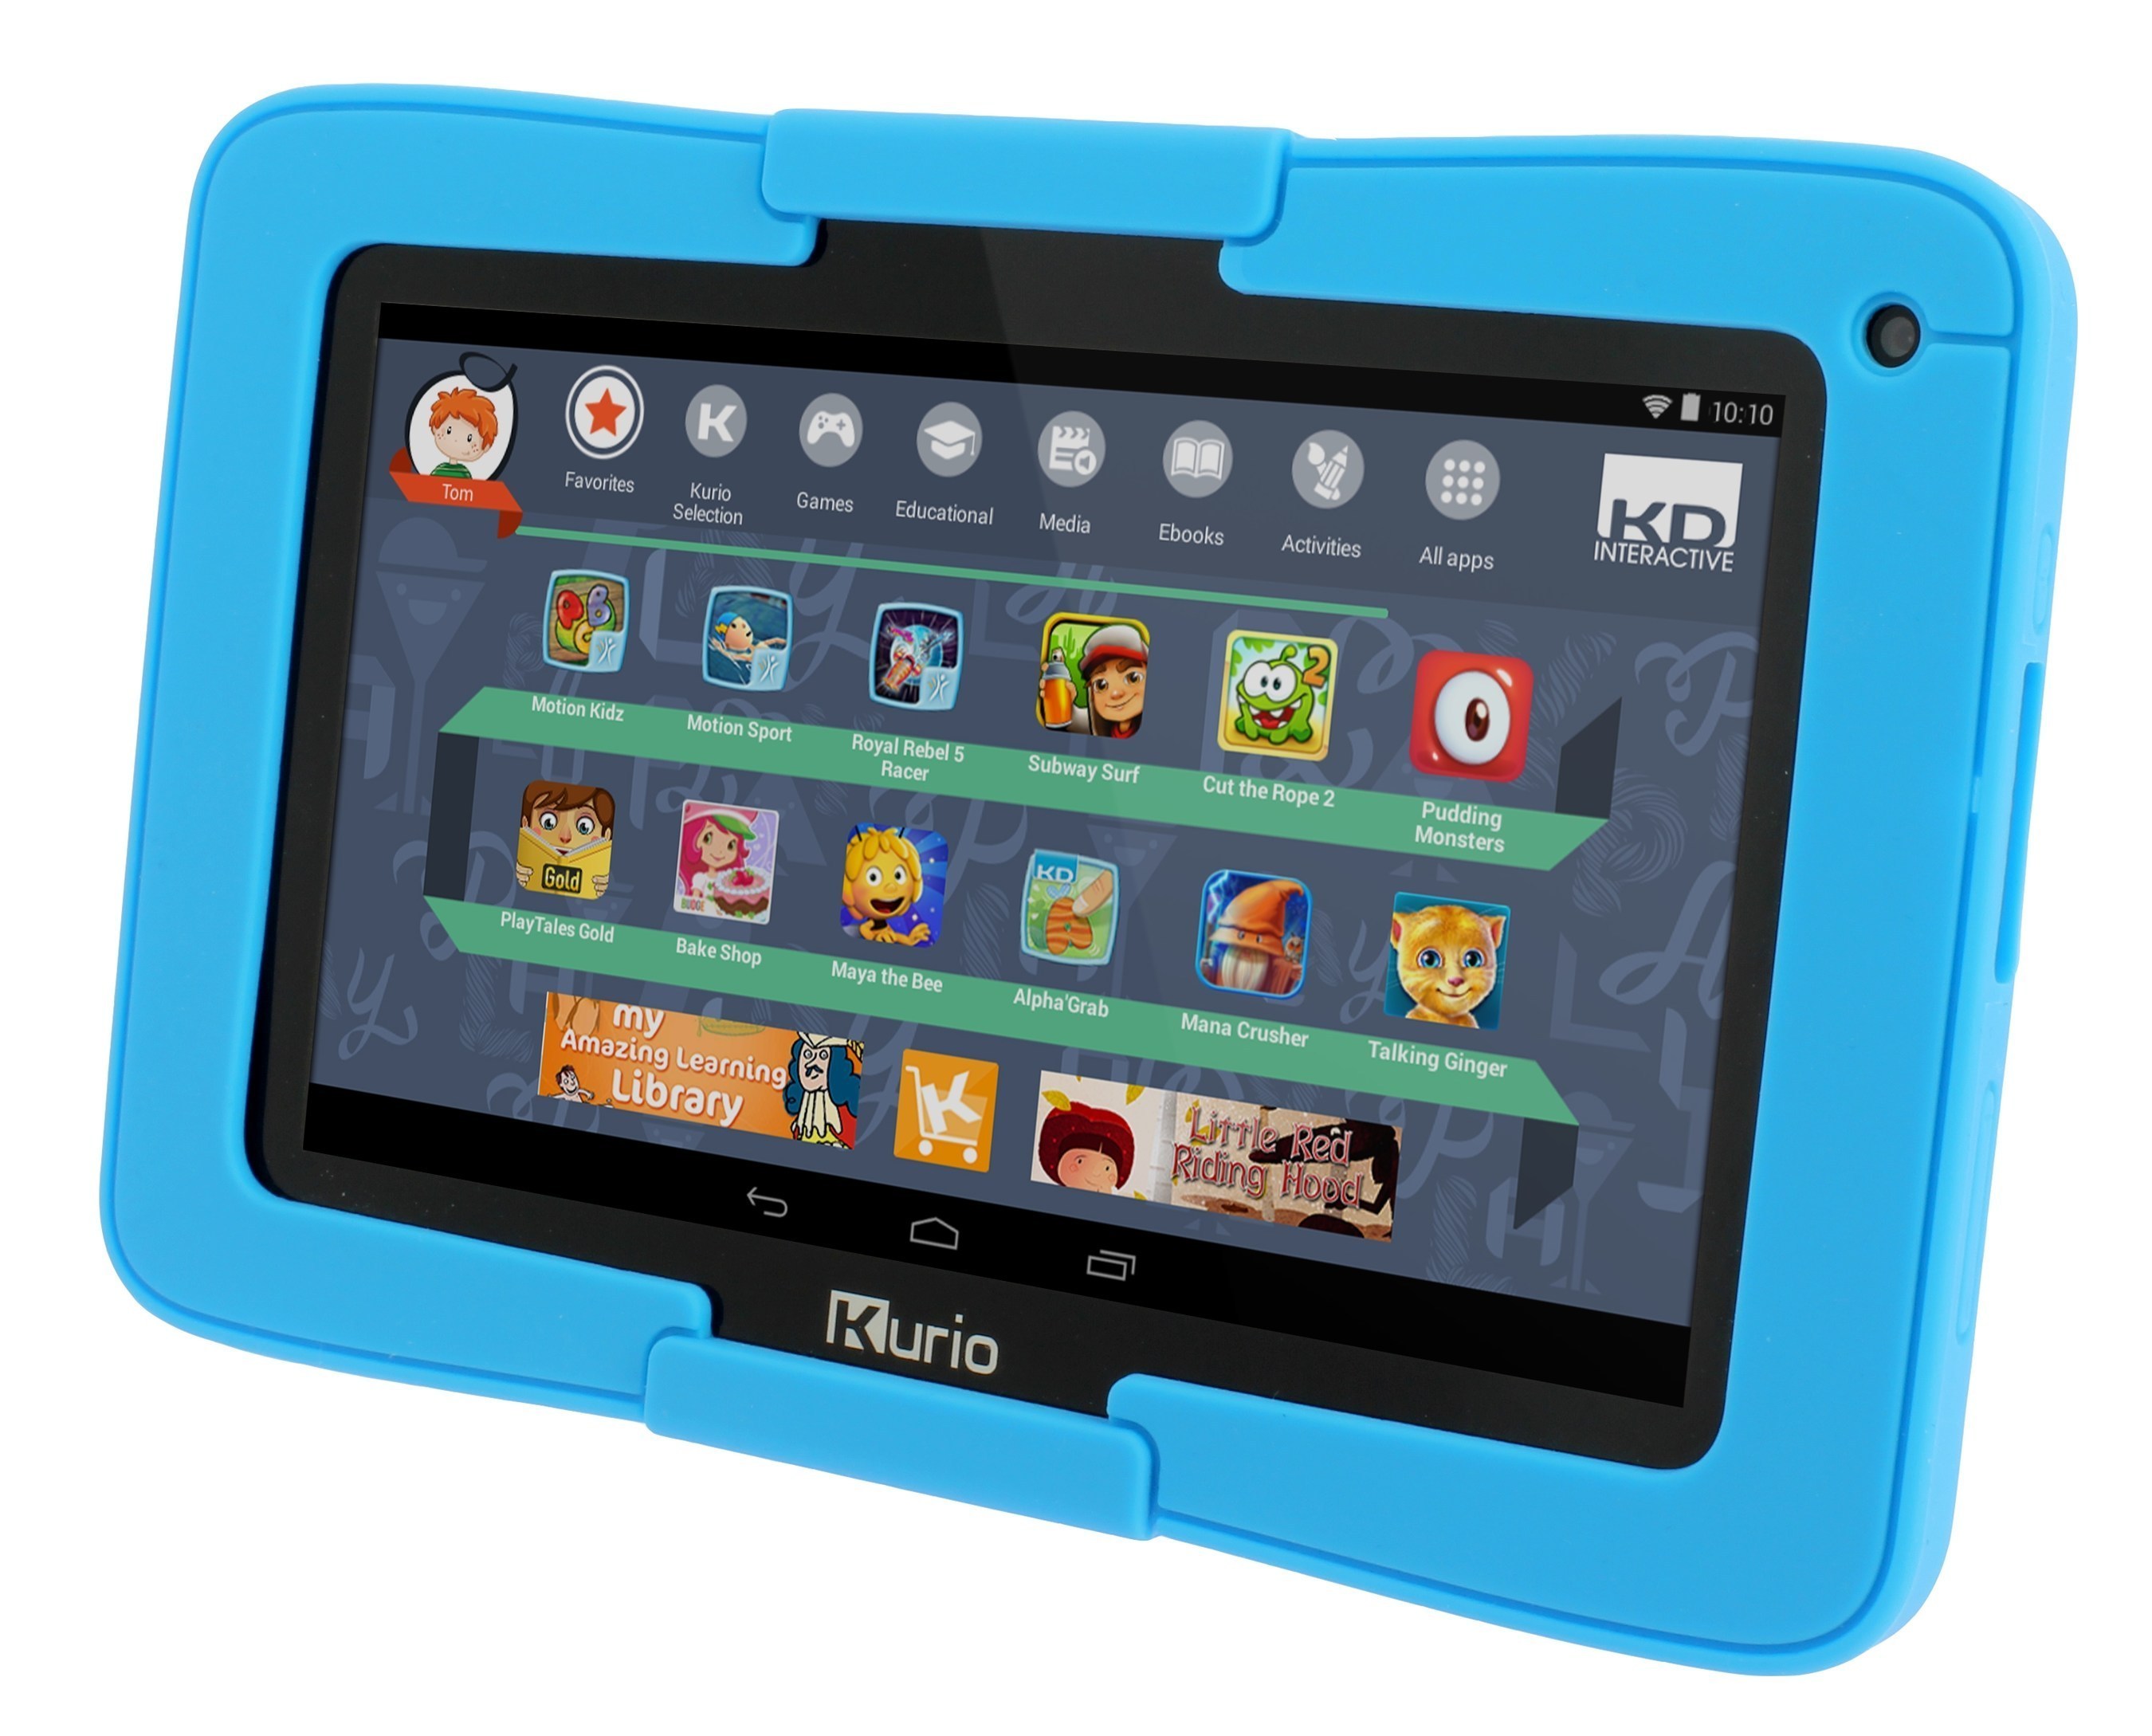 Designed for extreme play, Kurio Xtreme is the Ultimate Android Tablet Built for Kids.  It comes preloaded with 10 Kurio Motion body controlled games and more than $300 worth of free apps, games and other premium content.  This Google Certified device also offers access to millions of more apps through the curated Kurio Store and Google Play(TM).  A customizable easy-to-use child interface allows kids to choose their avatar, theme, wallpaper and password.  The kid tablet also comes with a protective bumper. (PRNewsFoto/Techno Source)